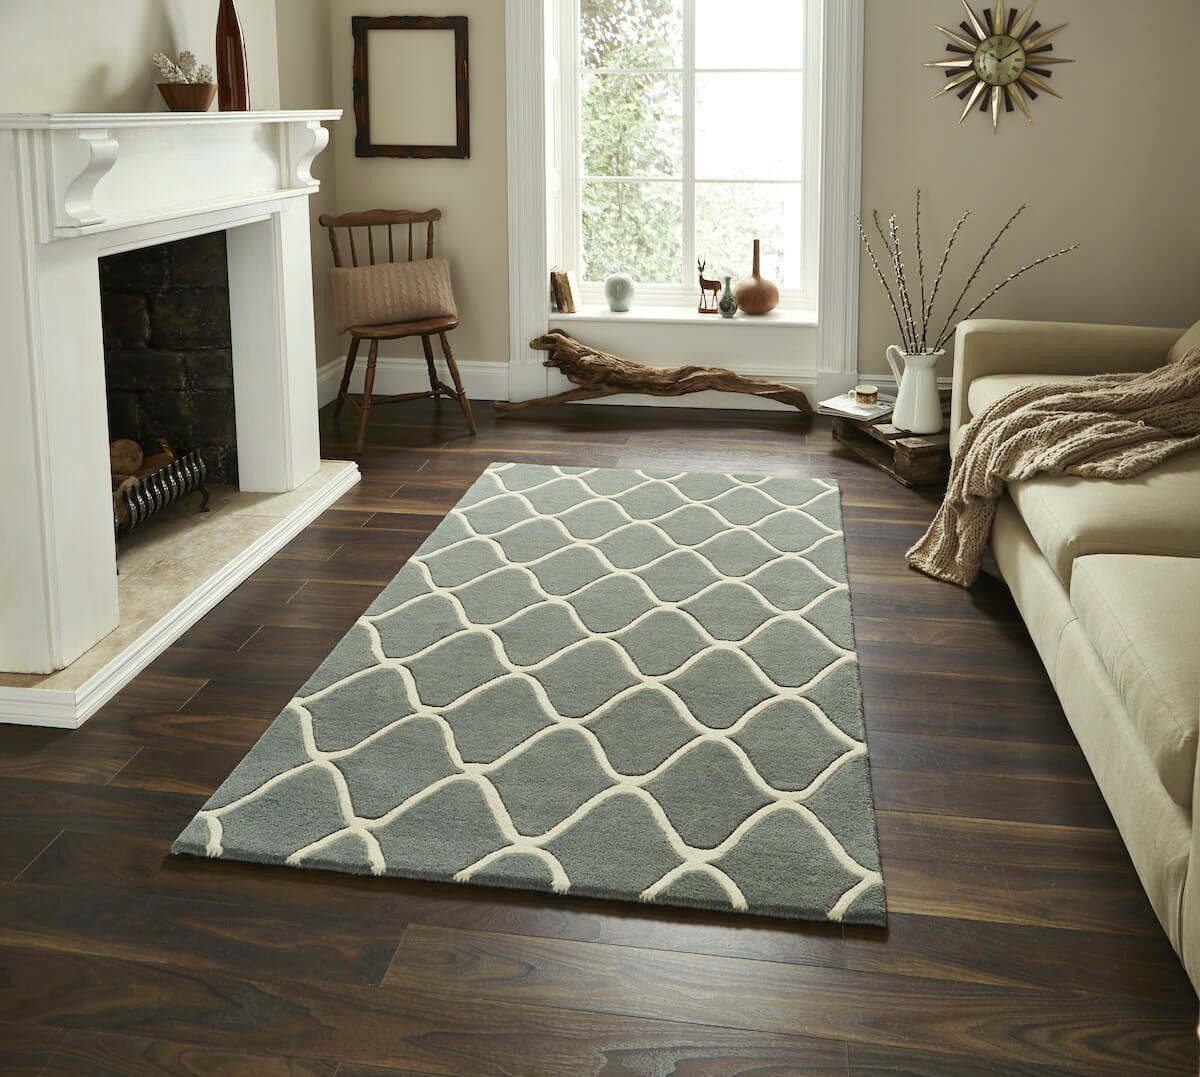 How Area Rugs Spruce Up Your Home